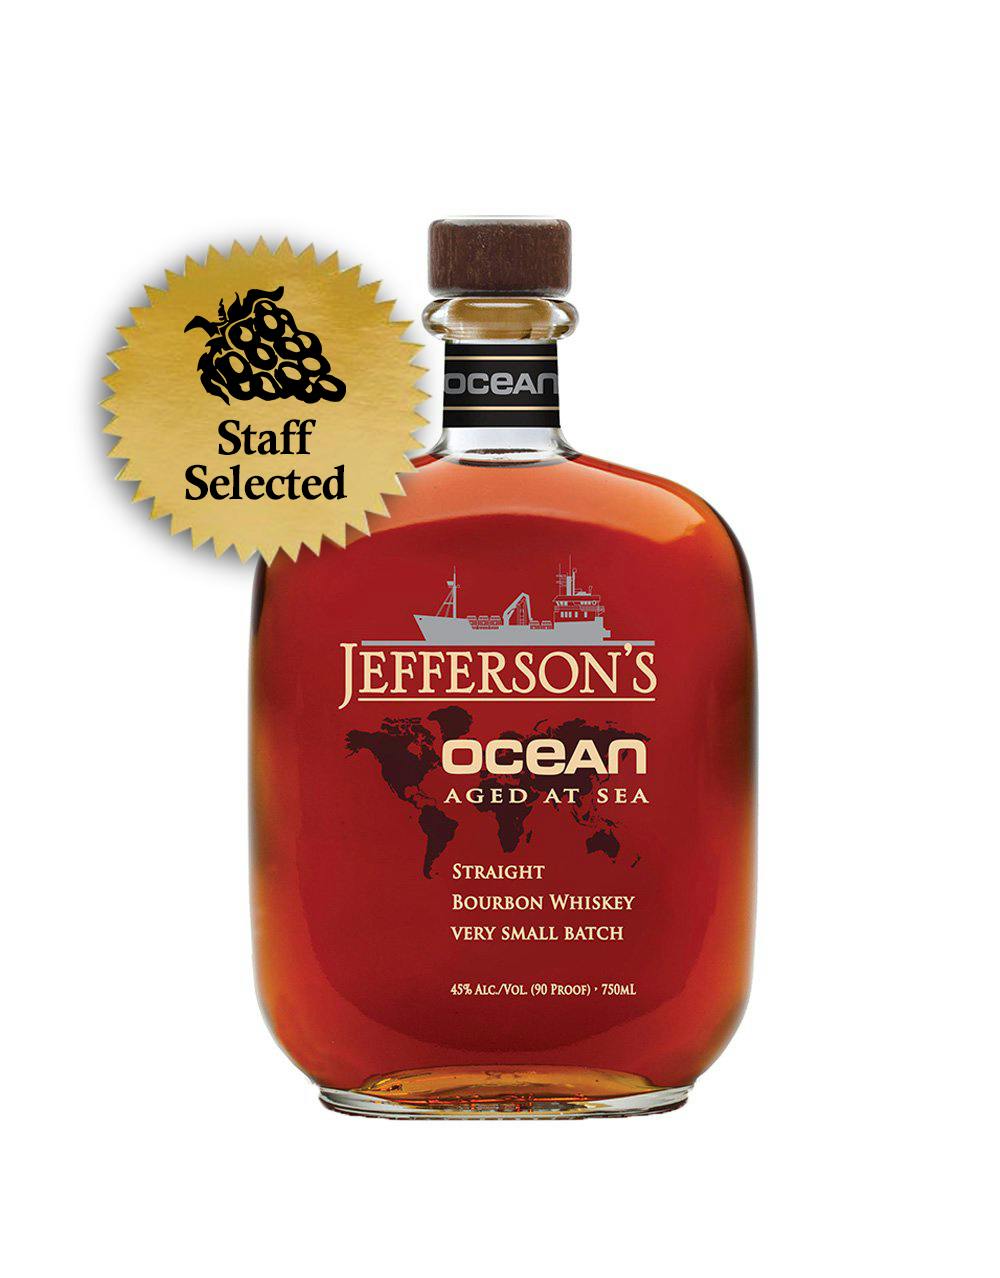 Jeffersons Ocean Aged At Sea Cask Strength Bourbon Whiskey